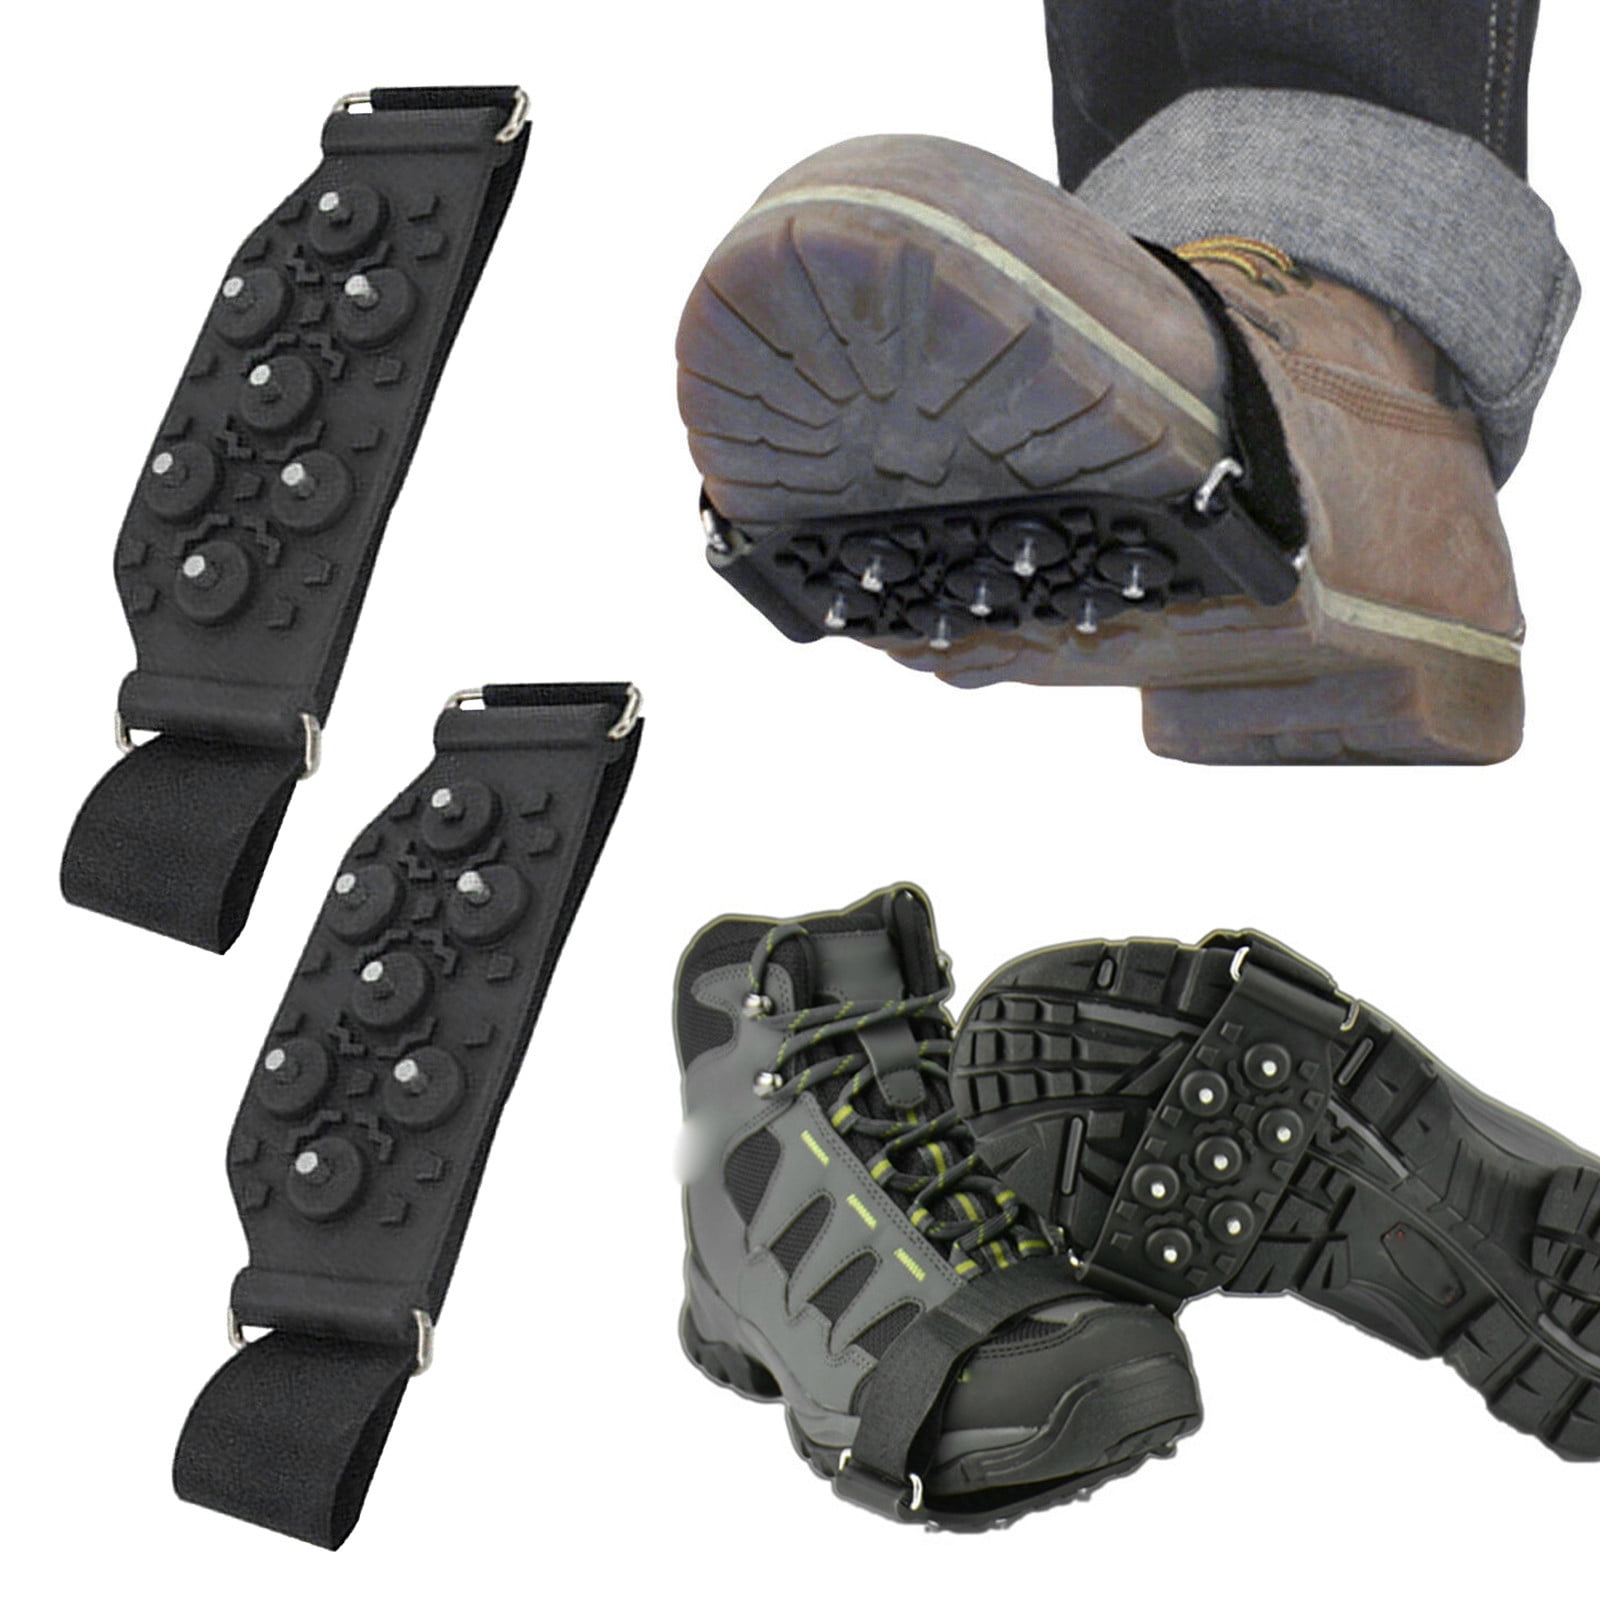 M-XL Universal Non Slip Snow Ice Grips Cleats Treads Crampons Shoe Boot Spikes 